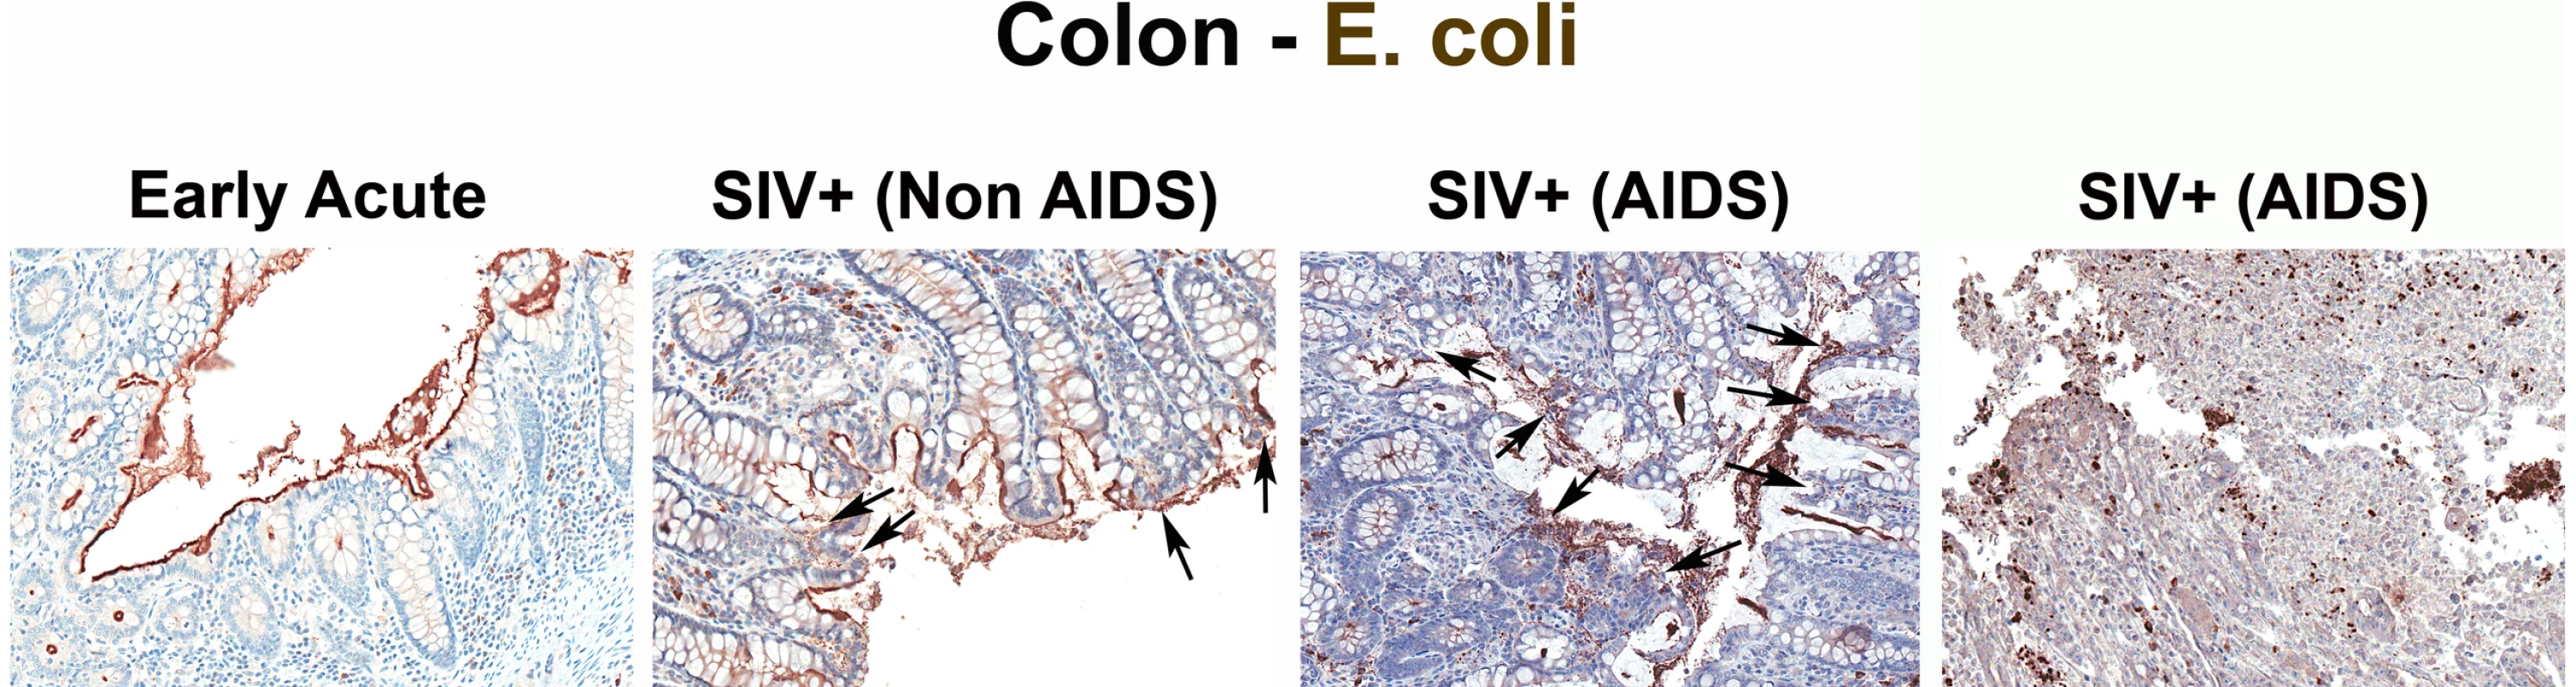 Identification of microbial translocation in large bowel of chronically SIV<sup>+</sup> RMs.